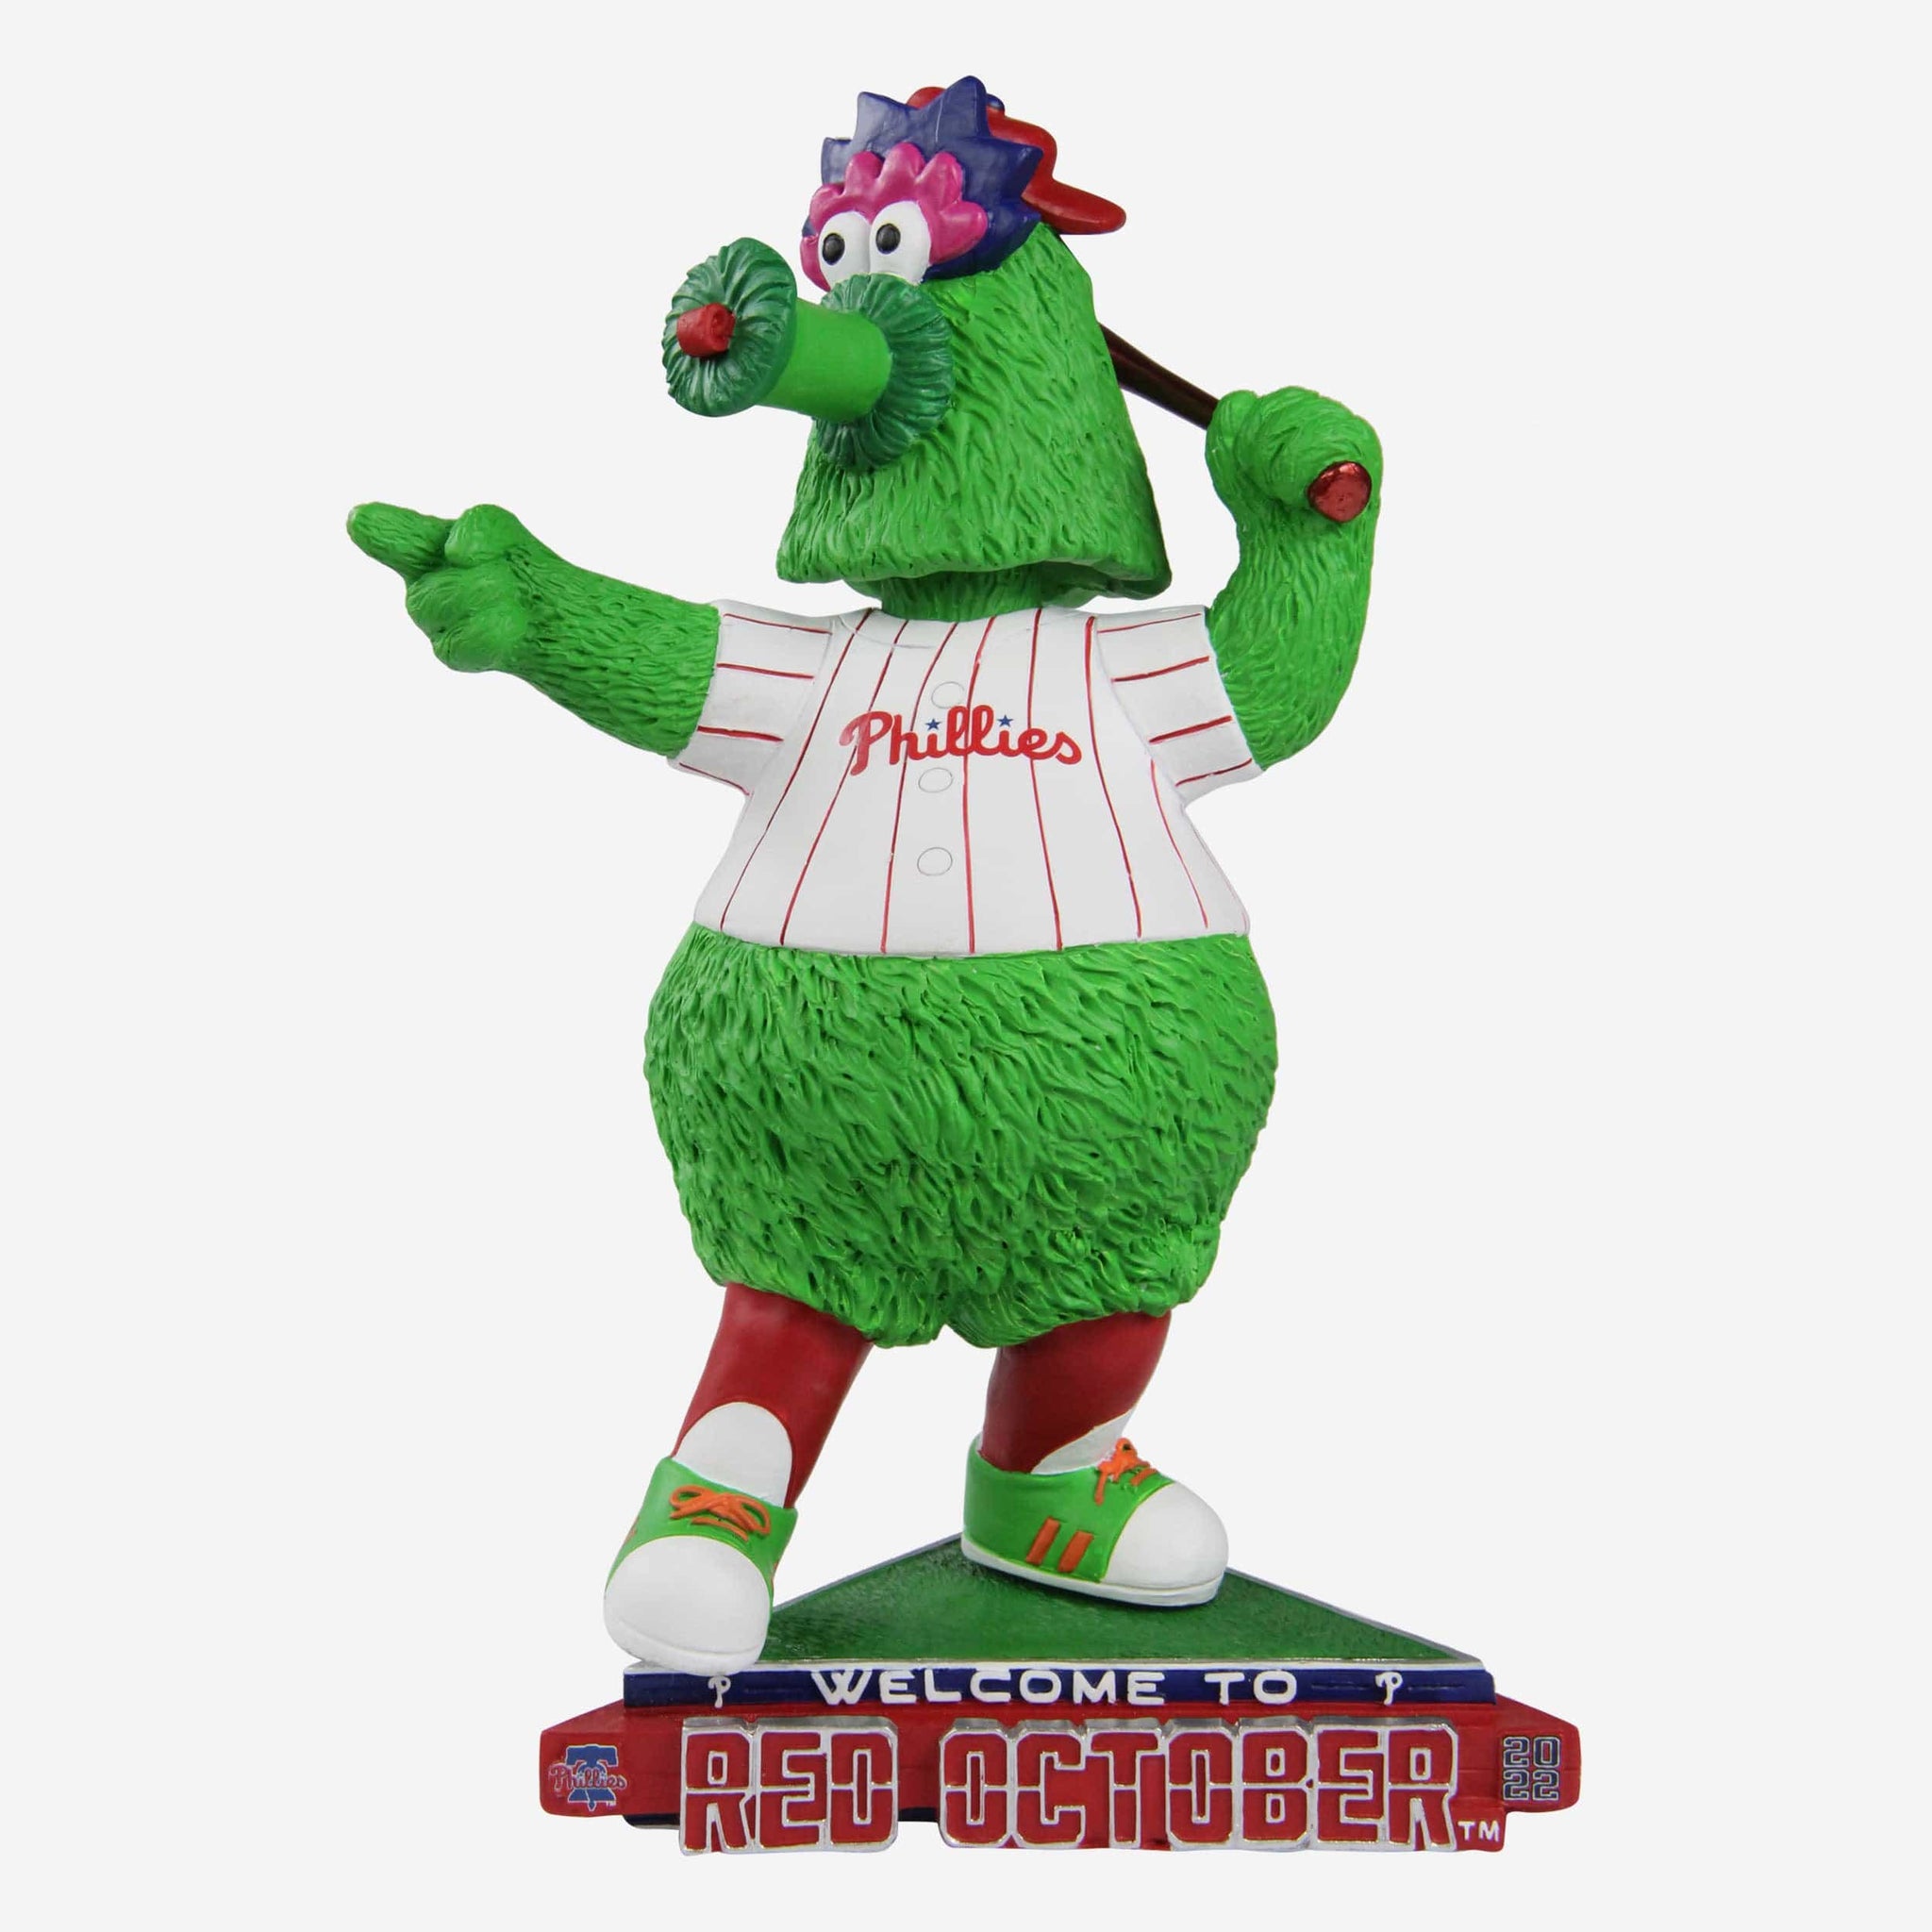 phillie phanatic coloring page